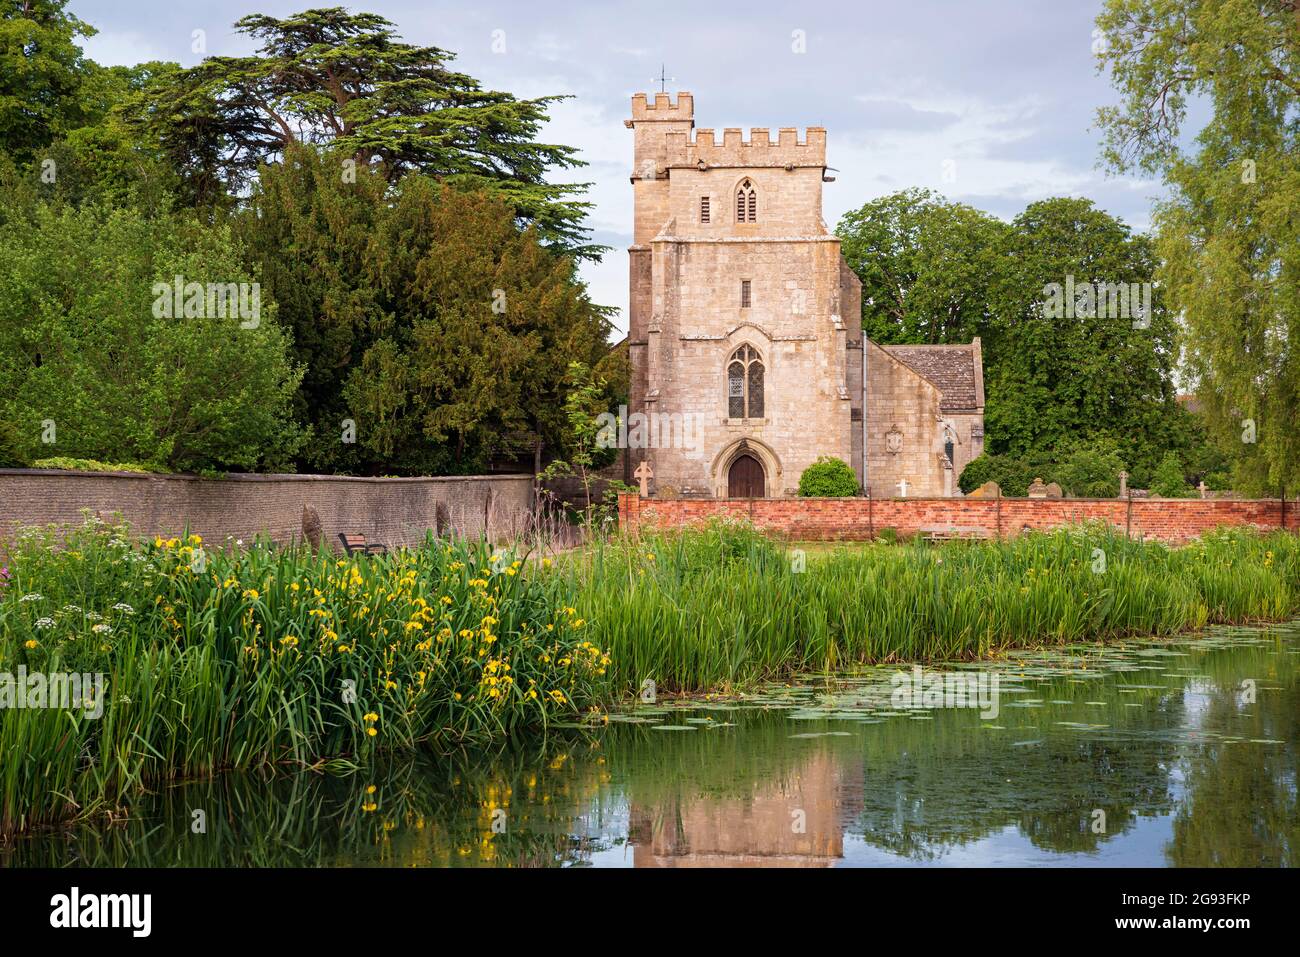 St Cyr's Church, Stonehouse, Gloucestershire and Stroudwater Navigation canal Stock Photo